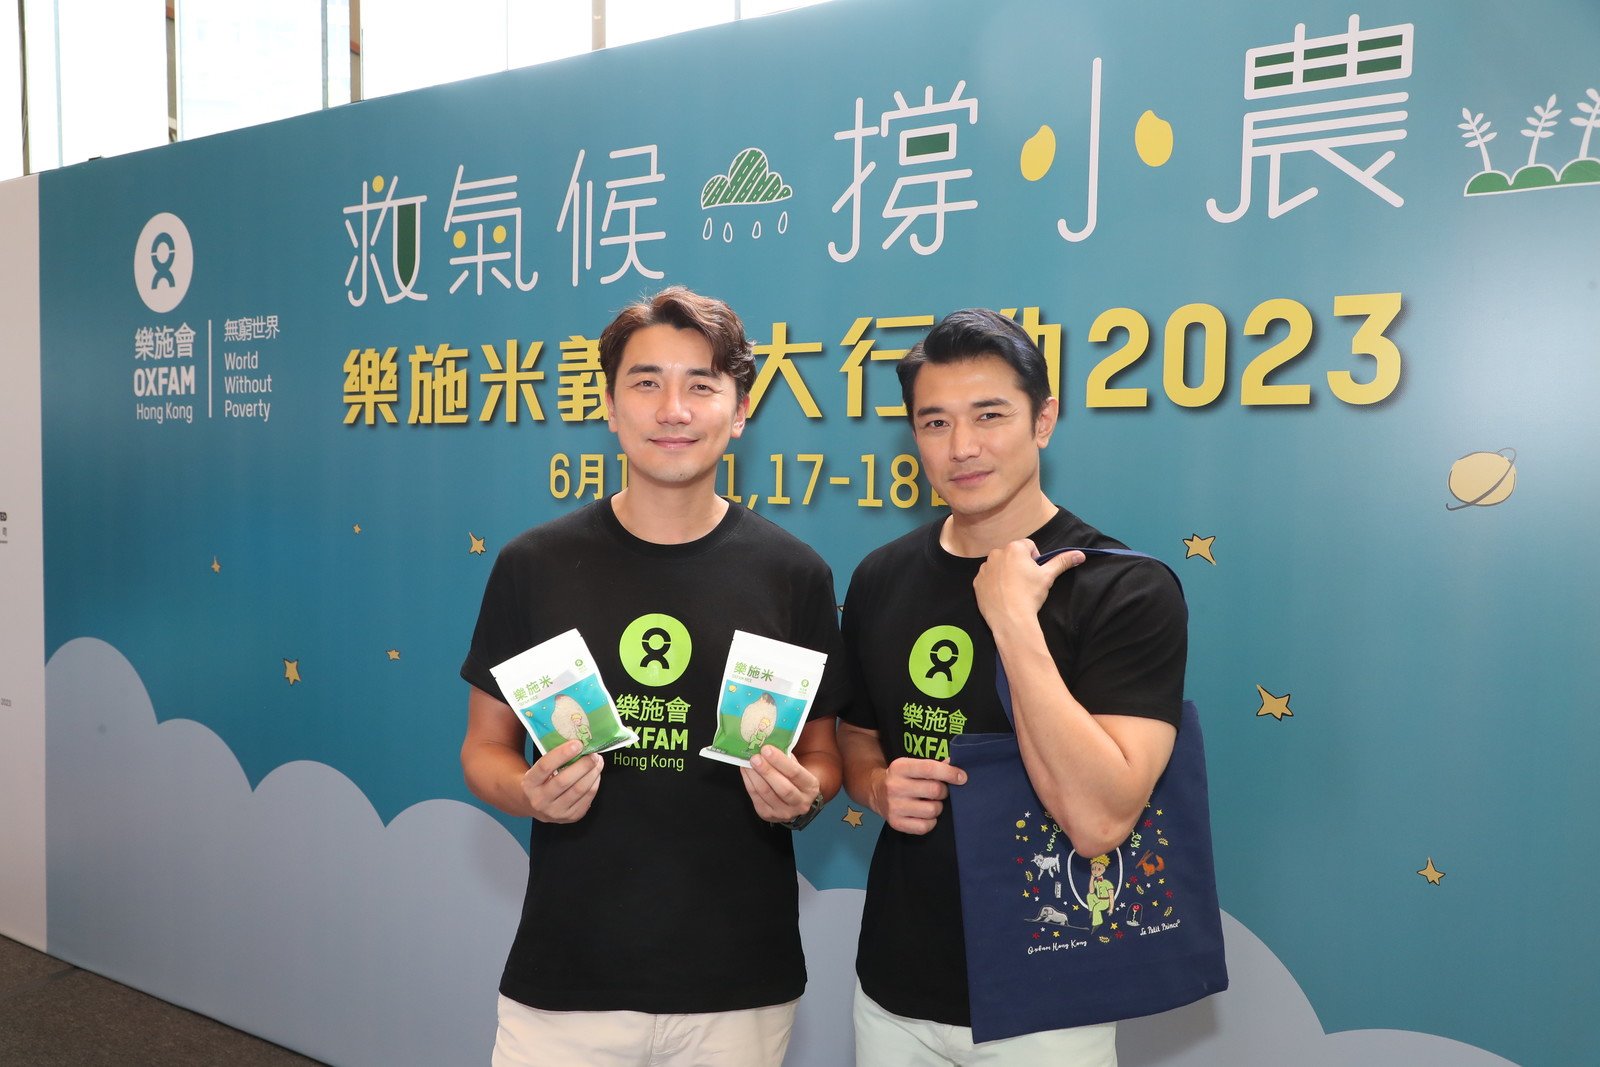 Artists Tony Hung (left) and Stefan Wong (right) calling on the public to support Oxfam Rice Event 2023 at the opening ceremony.